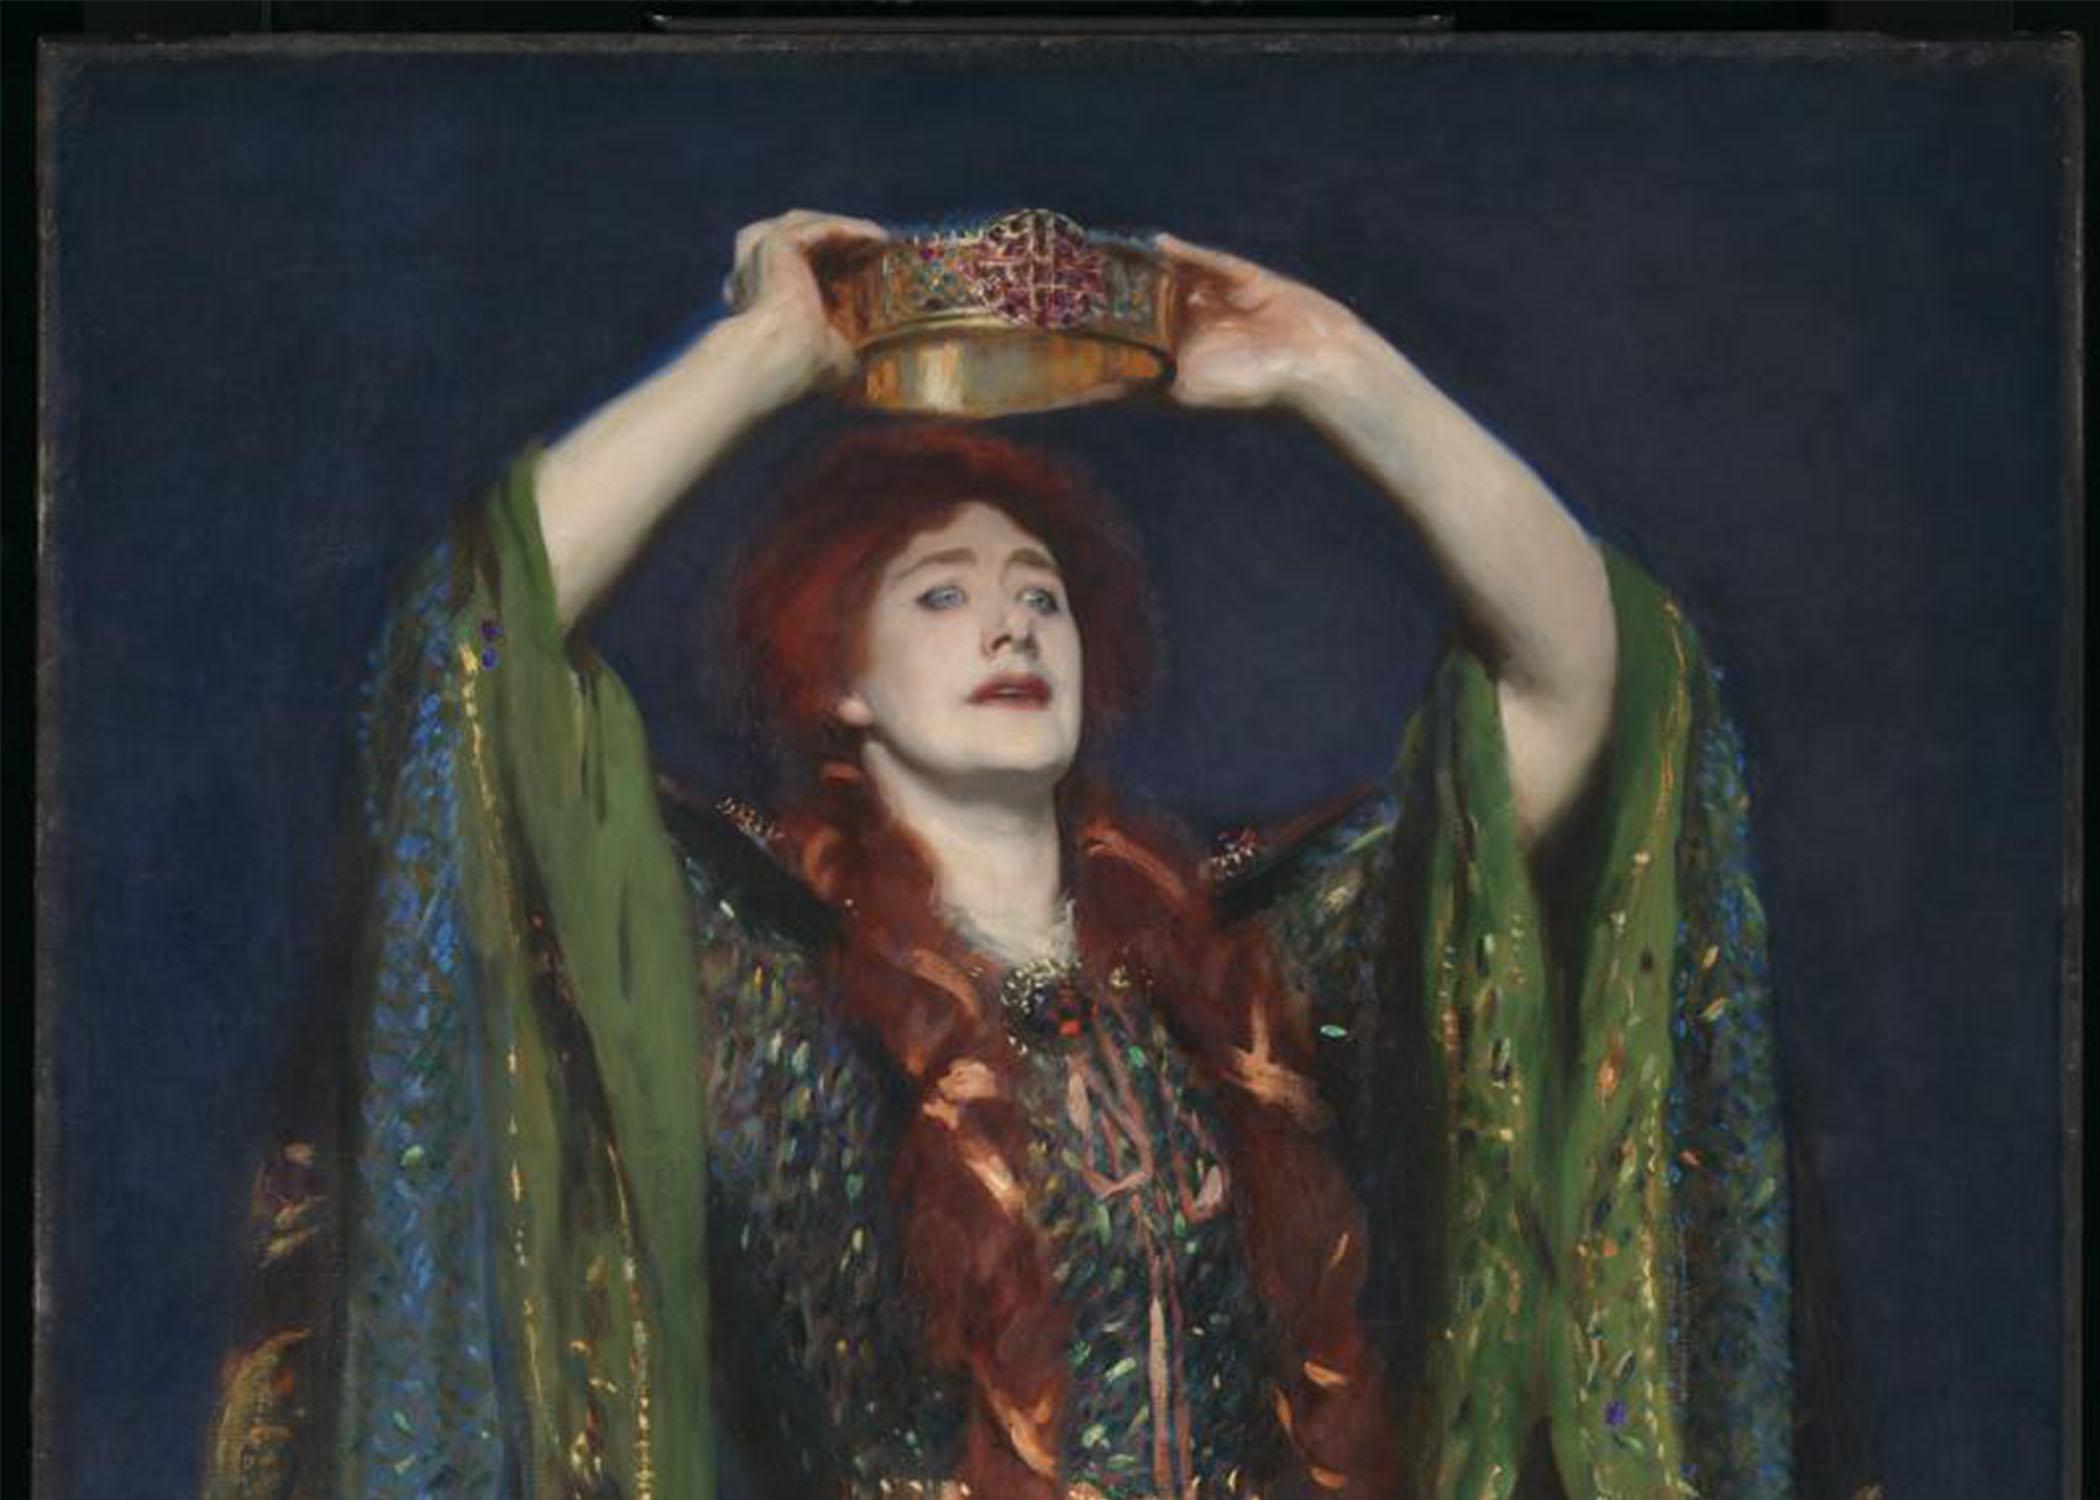 painted portrait of an imagined Lady Macbeth, with long red hair and green robes, arms outstretched, placing a crown on her own head